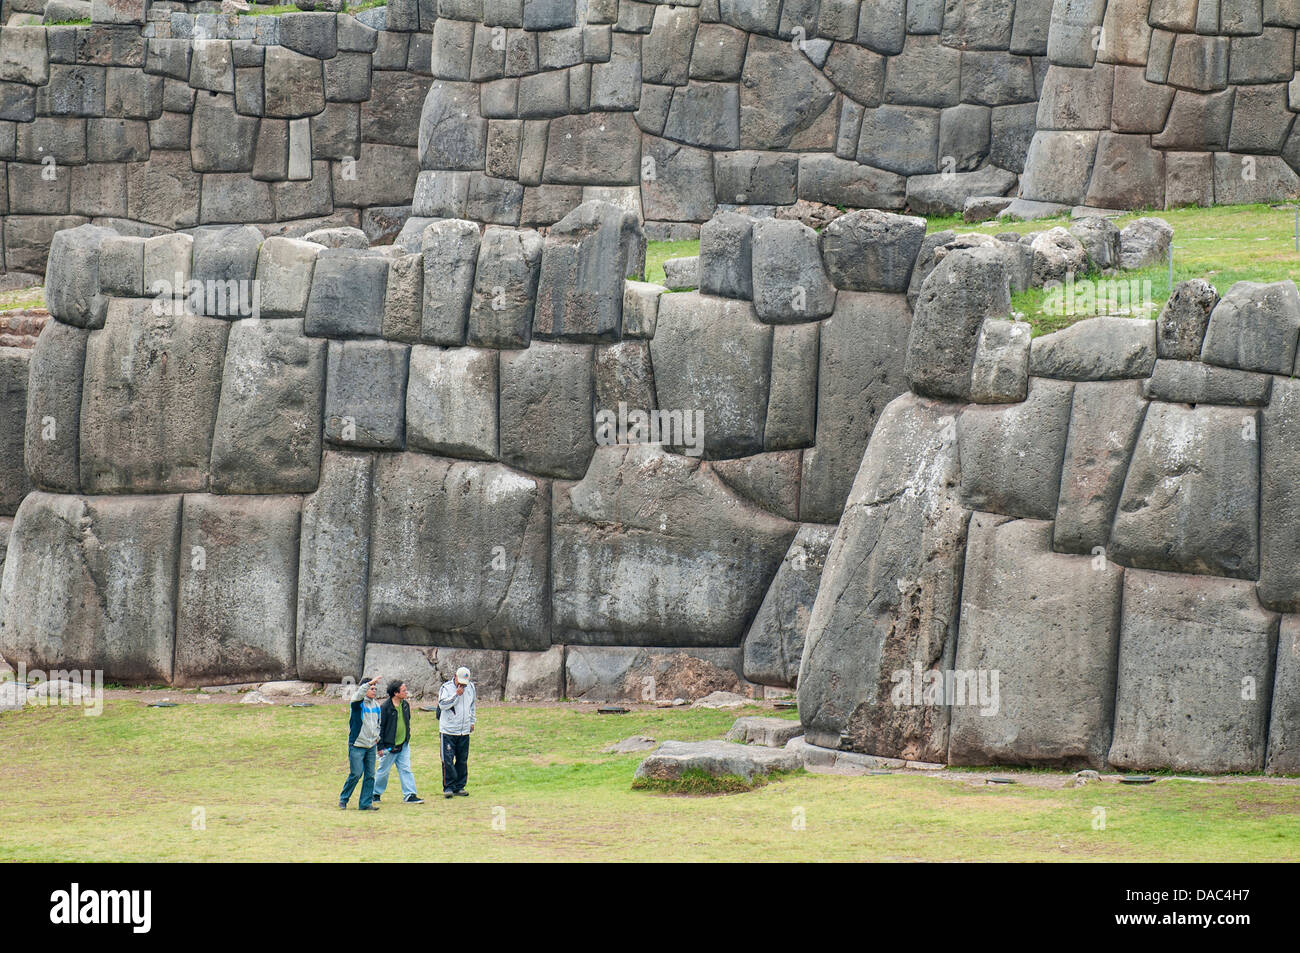 Ancient ruins of Saqsaywaman, Sacsayhuaman former capital of the Inca Incan Empire and UNESCO World Heritage Site, Cusco, Peru. Stock Photo